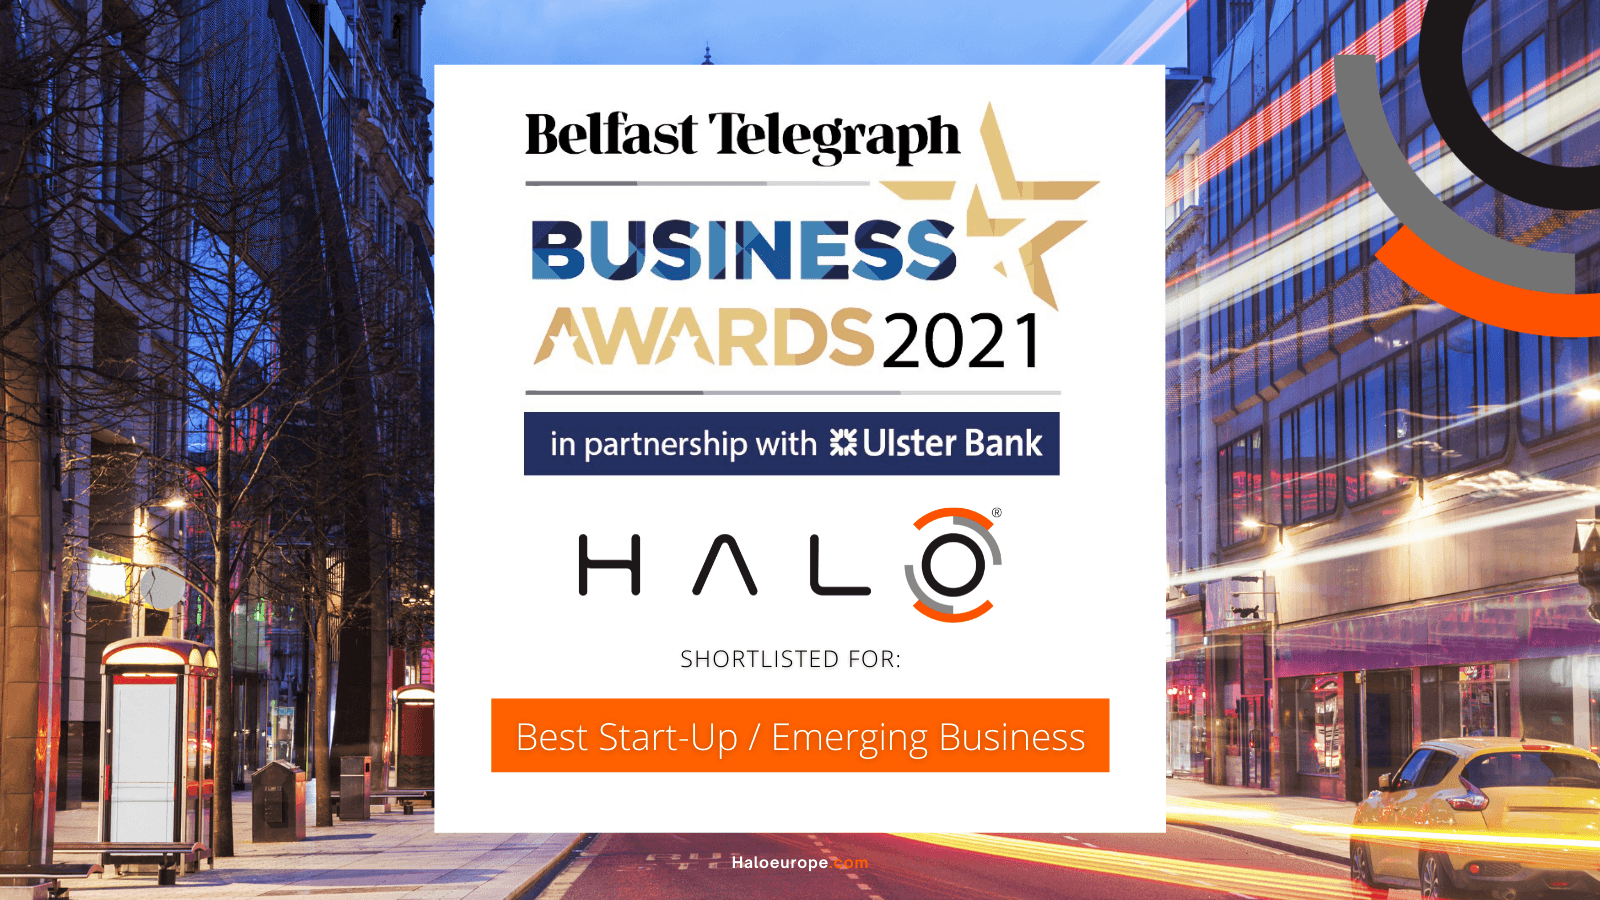 HALO - SHORTLISTED IN BELFAST TELEGRAPH BUSINESS AWARDS 2021